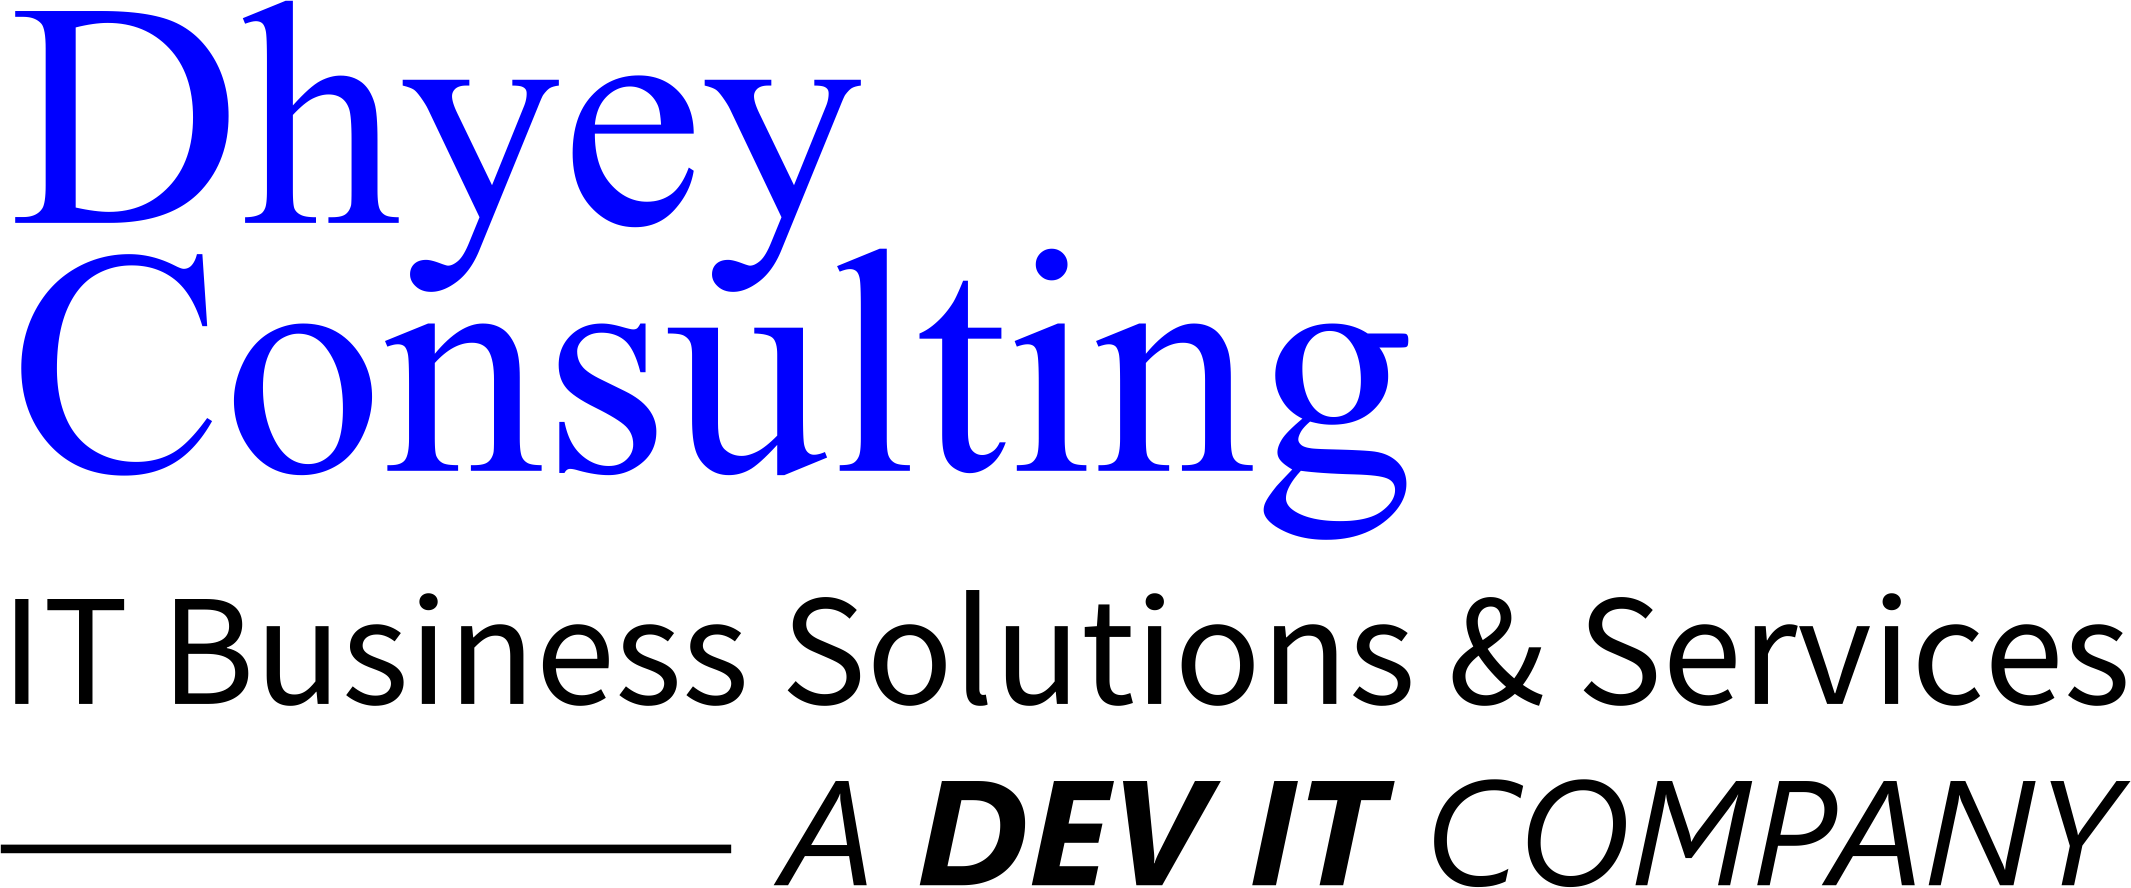 Dhyey Consulting Services Pvt Ltd